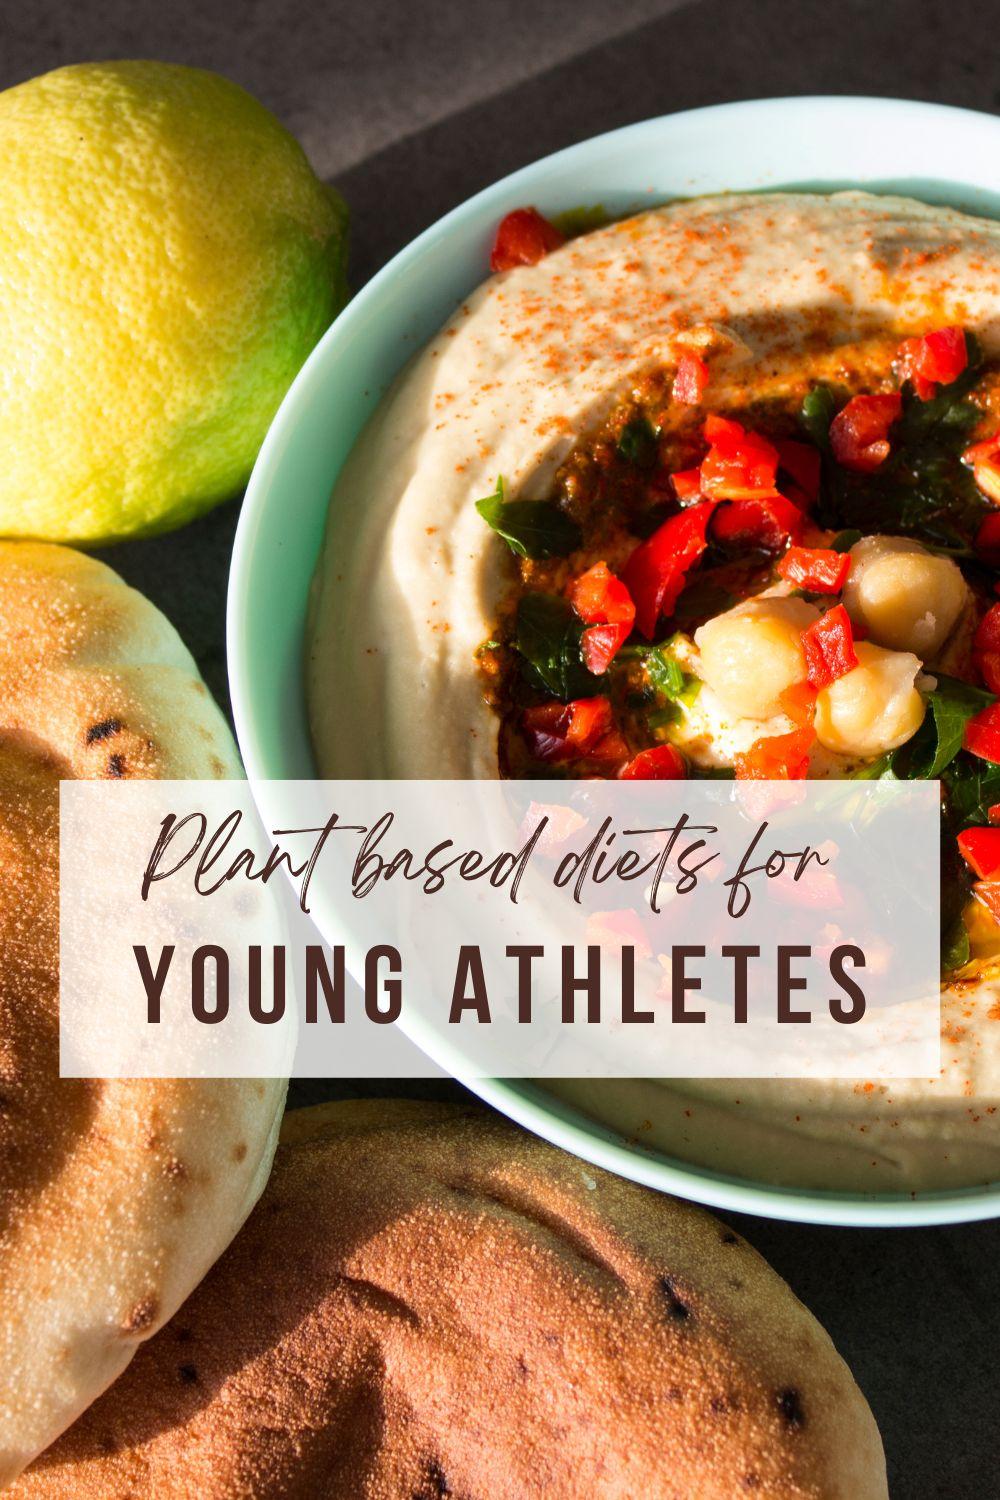 Is switching to a vegan diet advisable for young athletes, or will it impact health and performance?